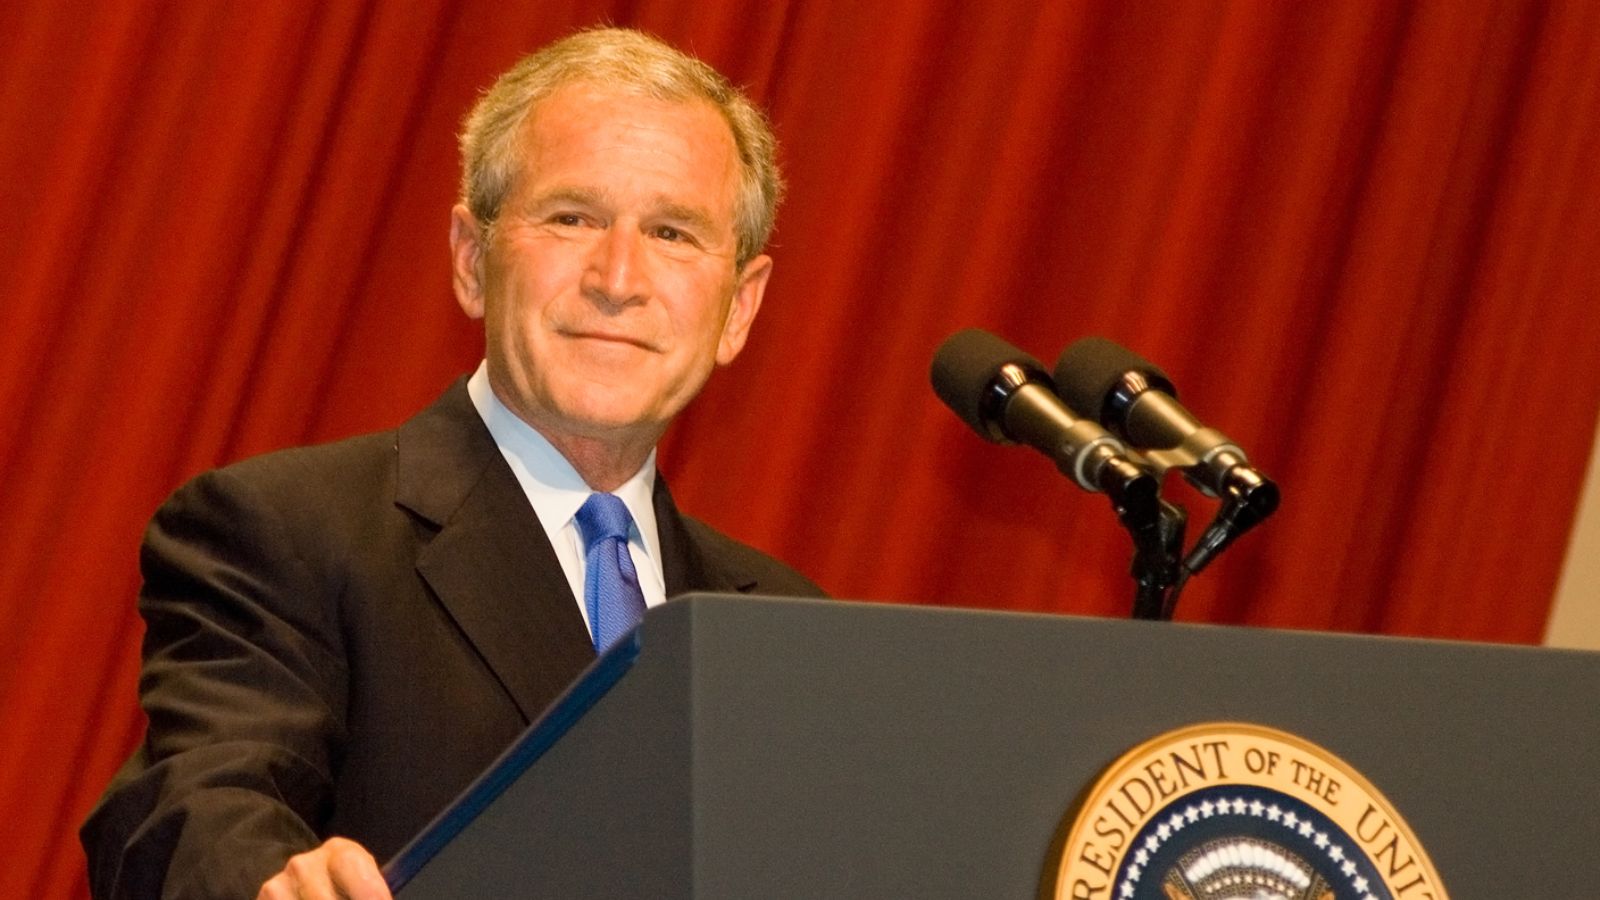 <p>Despite facing defeat in his re-election bid, Republican Bush left a significant mark during his presidency. He played a pivotal role in the dissolution of the Soviet Union. He orchestrated a military intervention to expel Iraqi President Saddam Hussein from Kuwait. Bush endorsed his son’s successful 2000 presidential campaign through various public engagements. In a notable display of bipartisan collaboration, he partnered with his former rival Bill Clinton in 2005 to establish the Bush-Clinton Katrina Fund, raising over $100 million for hurricane victims in Louisiana. However, in 2017, Bush faced allegations of sexual harassment, vehemently denying any wrongdoing. The passing of George H. W. Bush in 2018 marked the conclusion of a consequential era in American politics.</p>